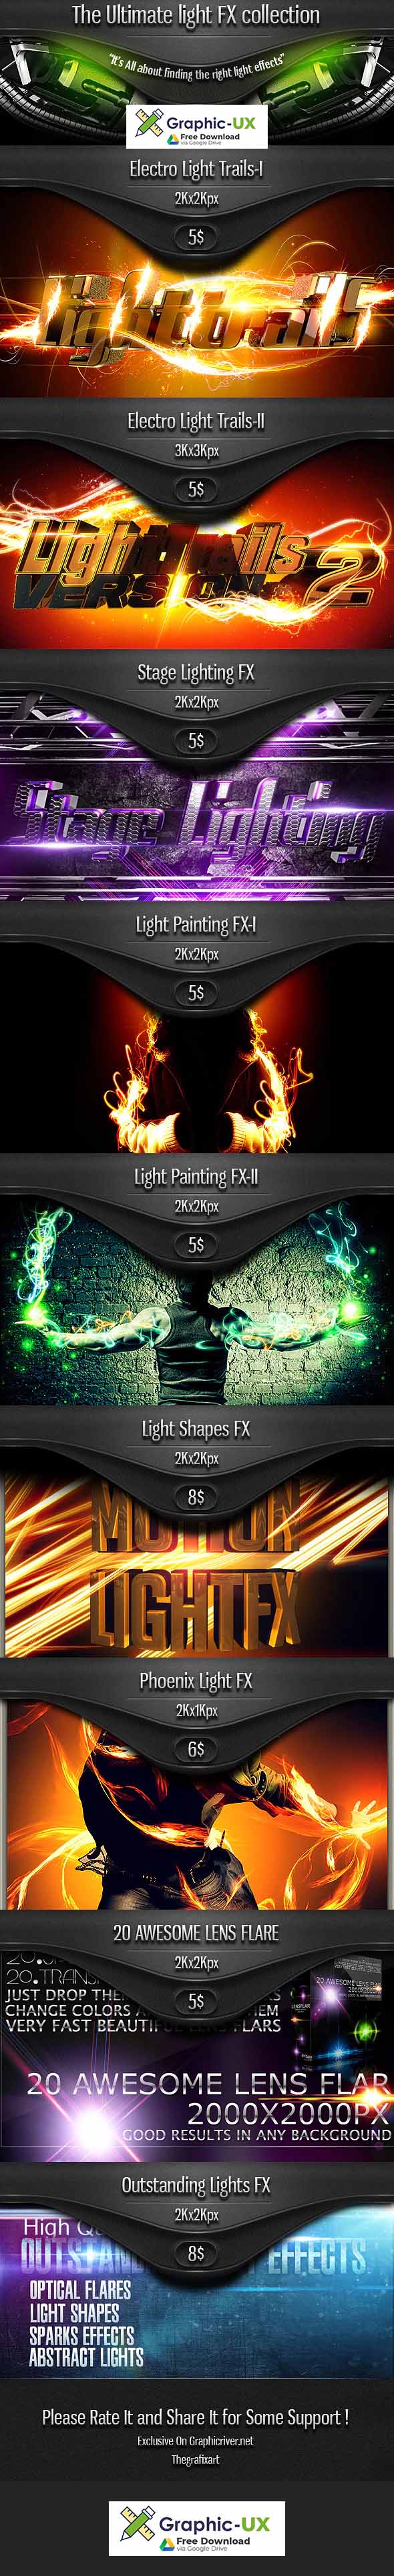 The Ultimate Light Effects Collection [THE BUNDLE] 